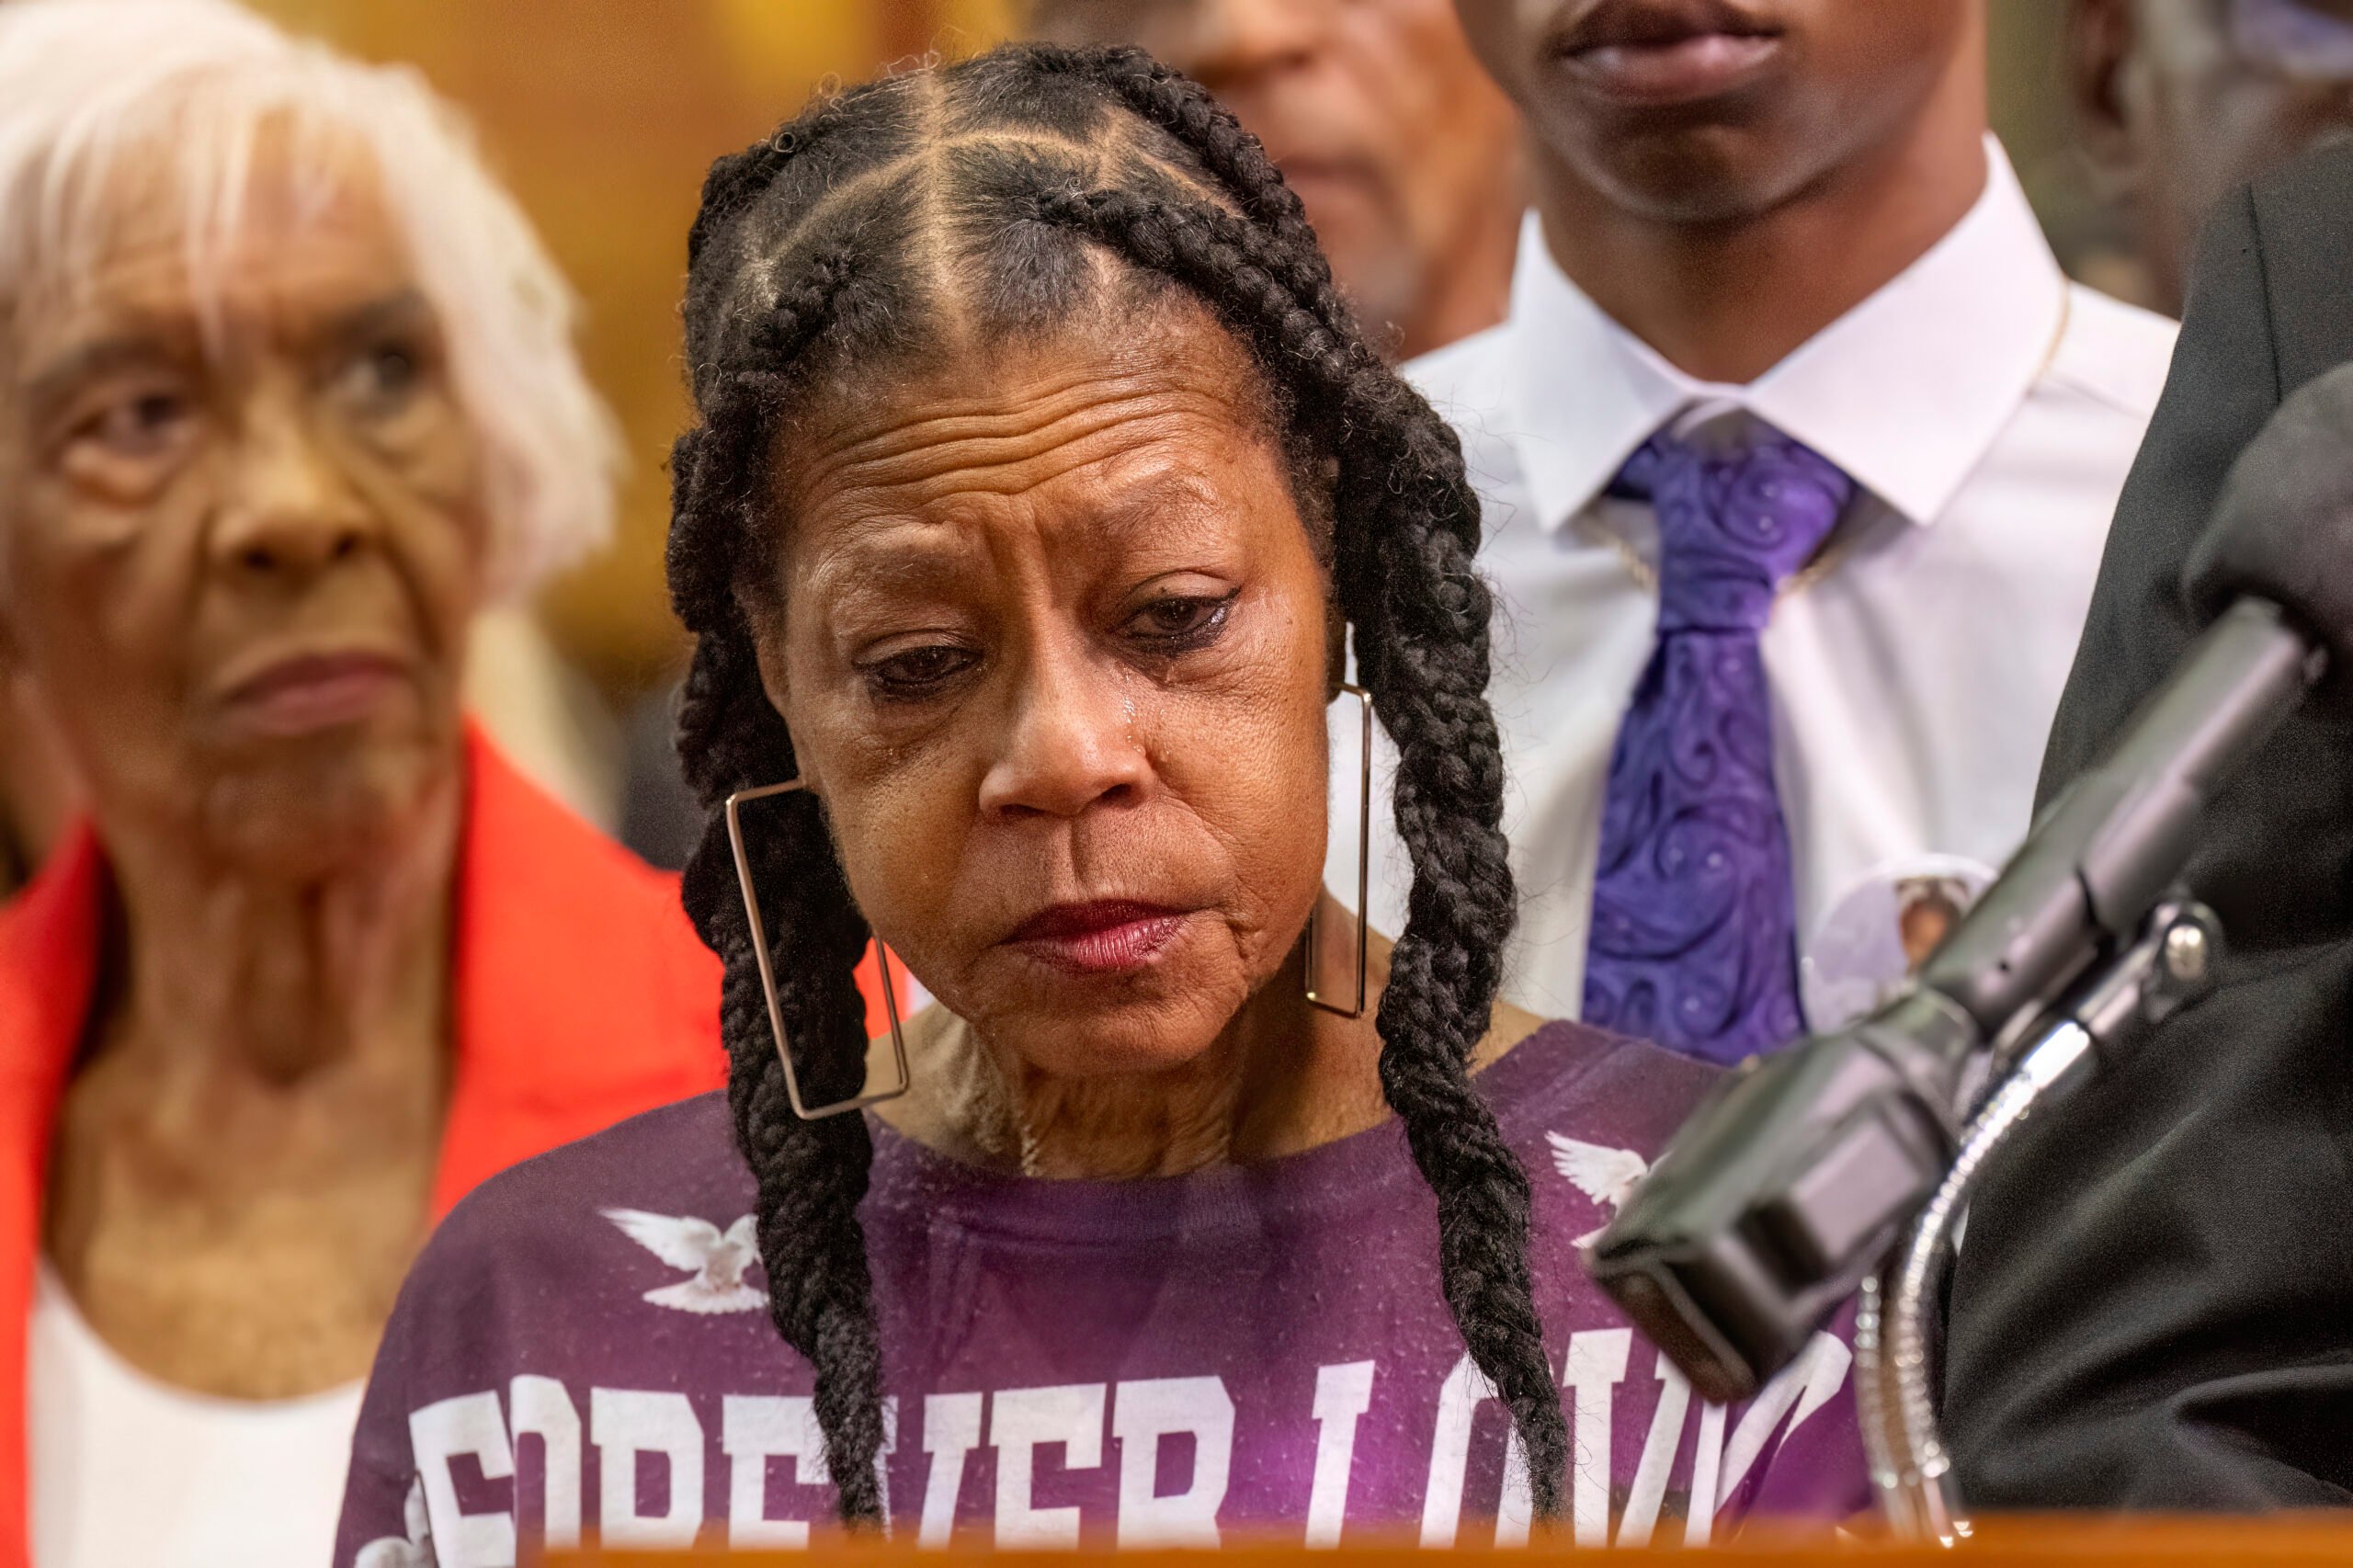 Tears stream down the face of Donna Massey as she listens to Attorney Ben Crump speak during a press conference over the shooting death of her daughter Sonya